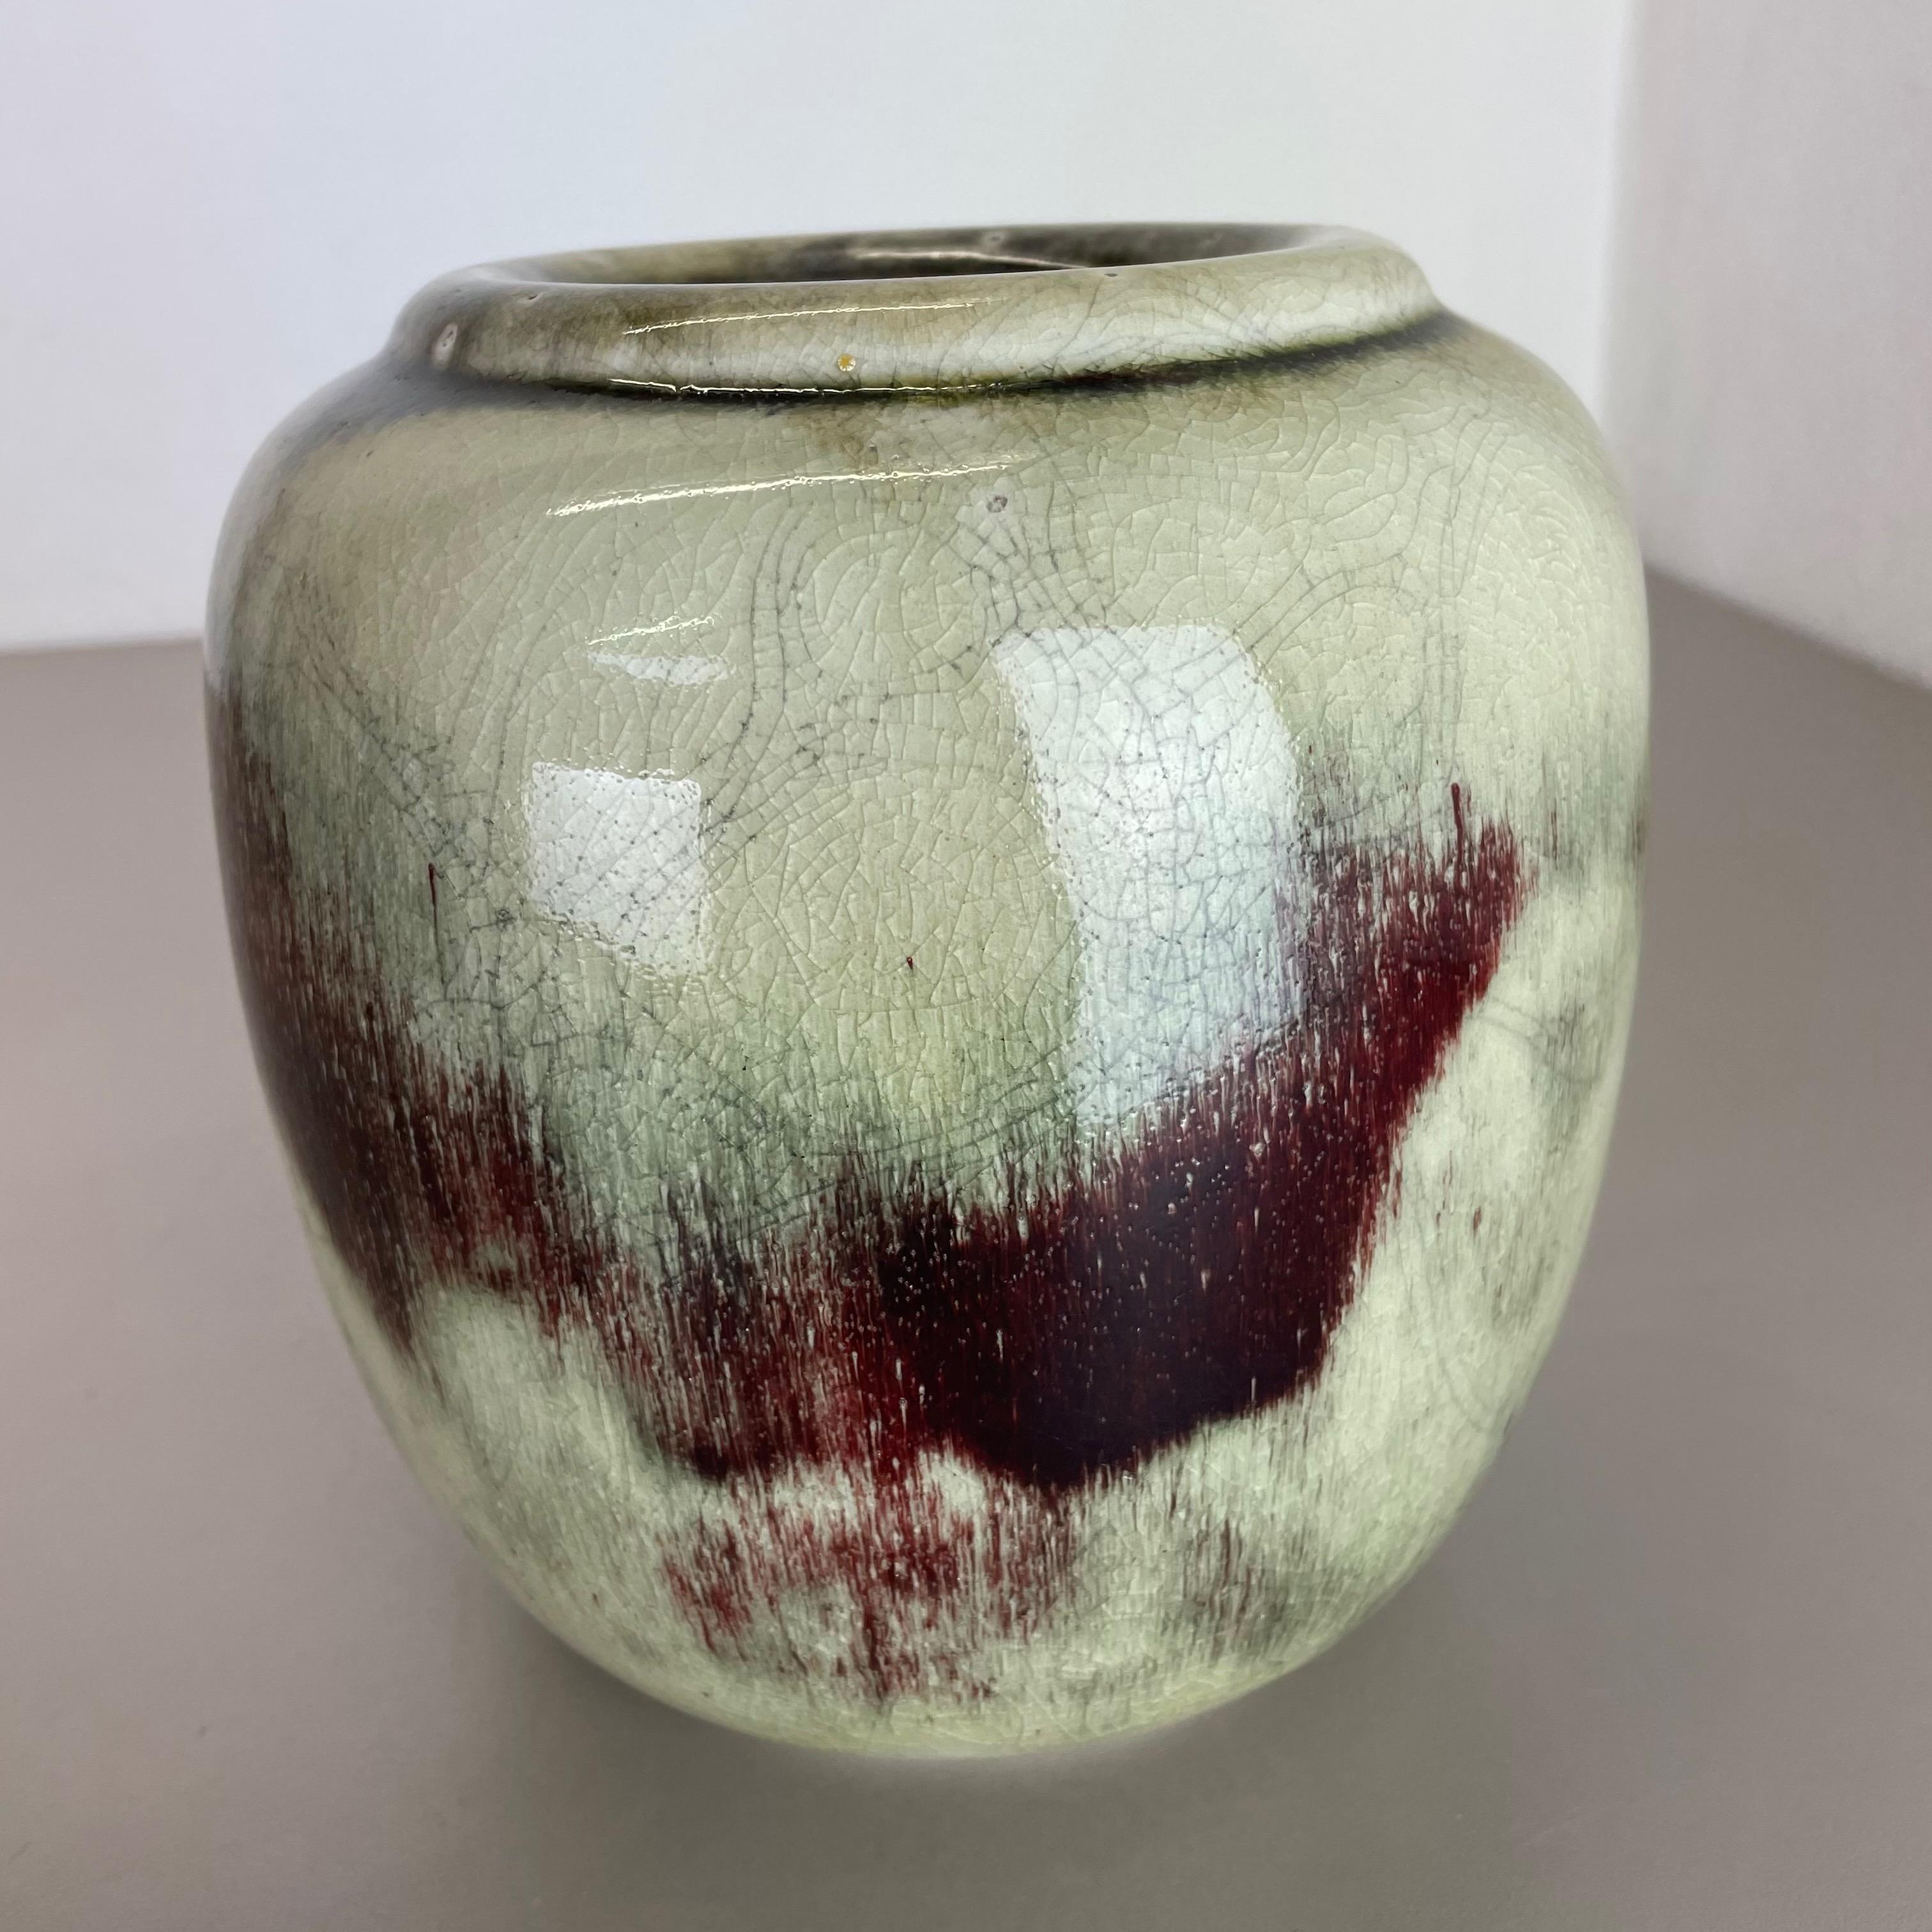 Unique Abstract Bauhaus Vase Pottery by WMF Ikora, Germany 1930s Art Deco For Sale 2